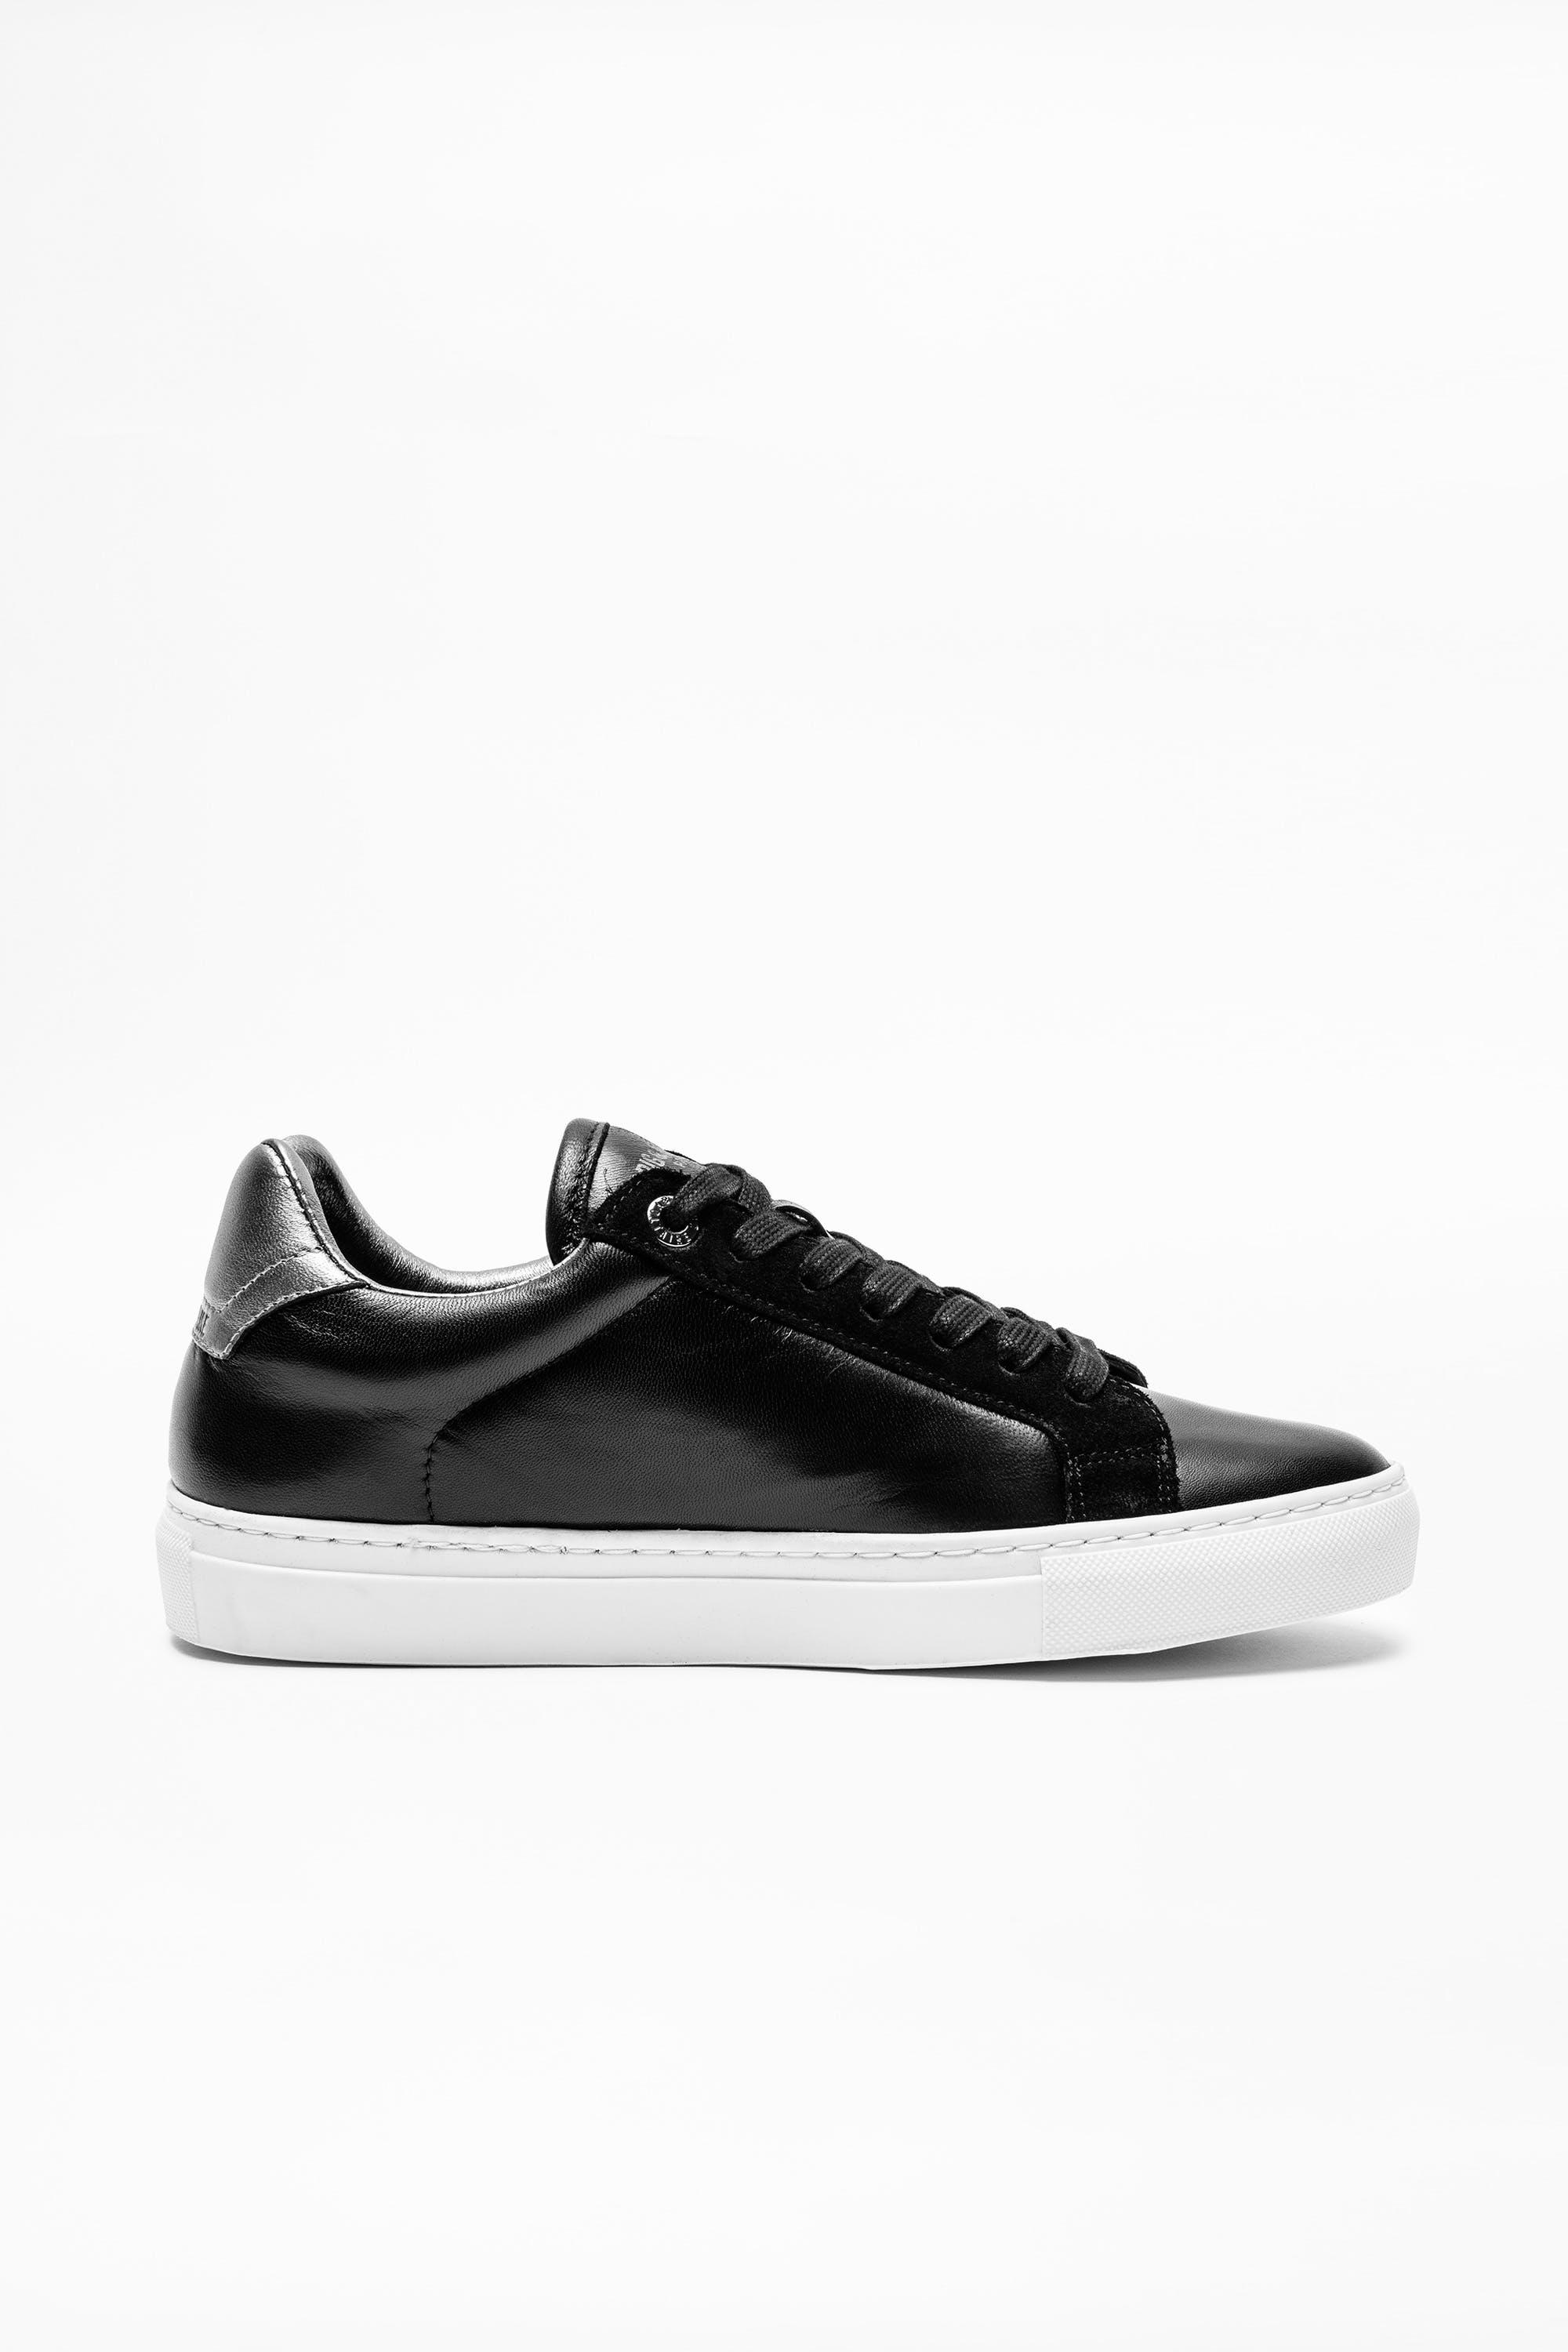 Zadig & Voltaire Leather Sneakers Zv1747 in Black Silver (Black) - Lyst